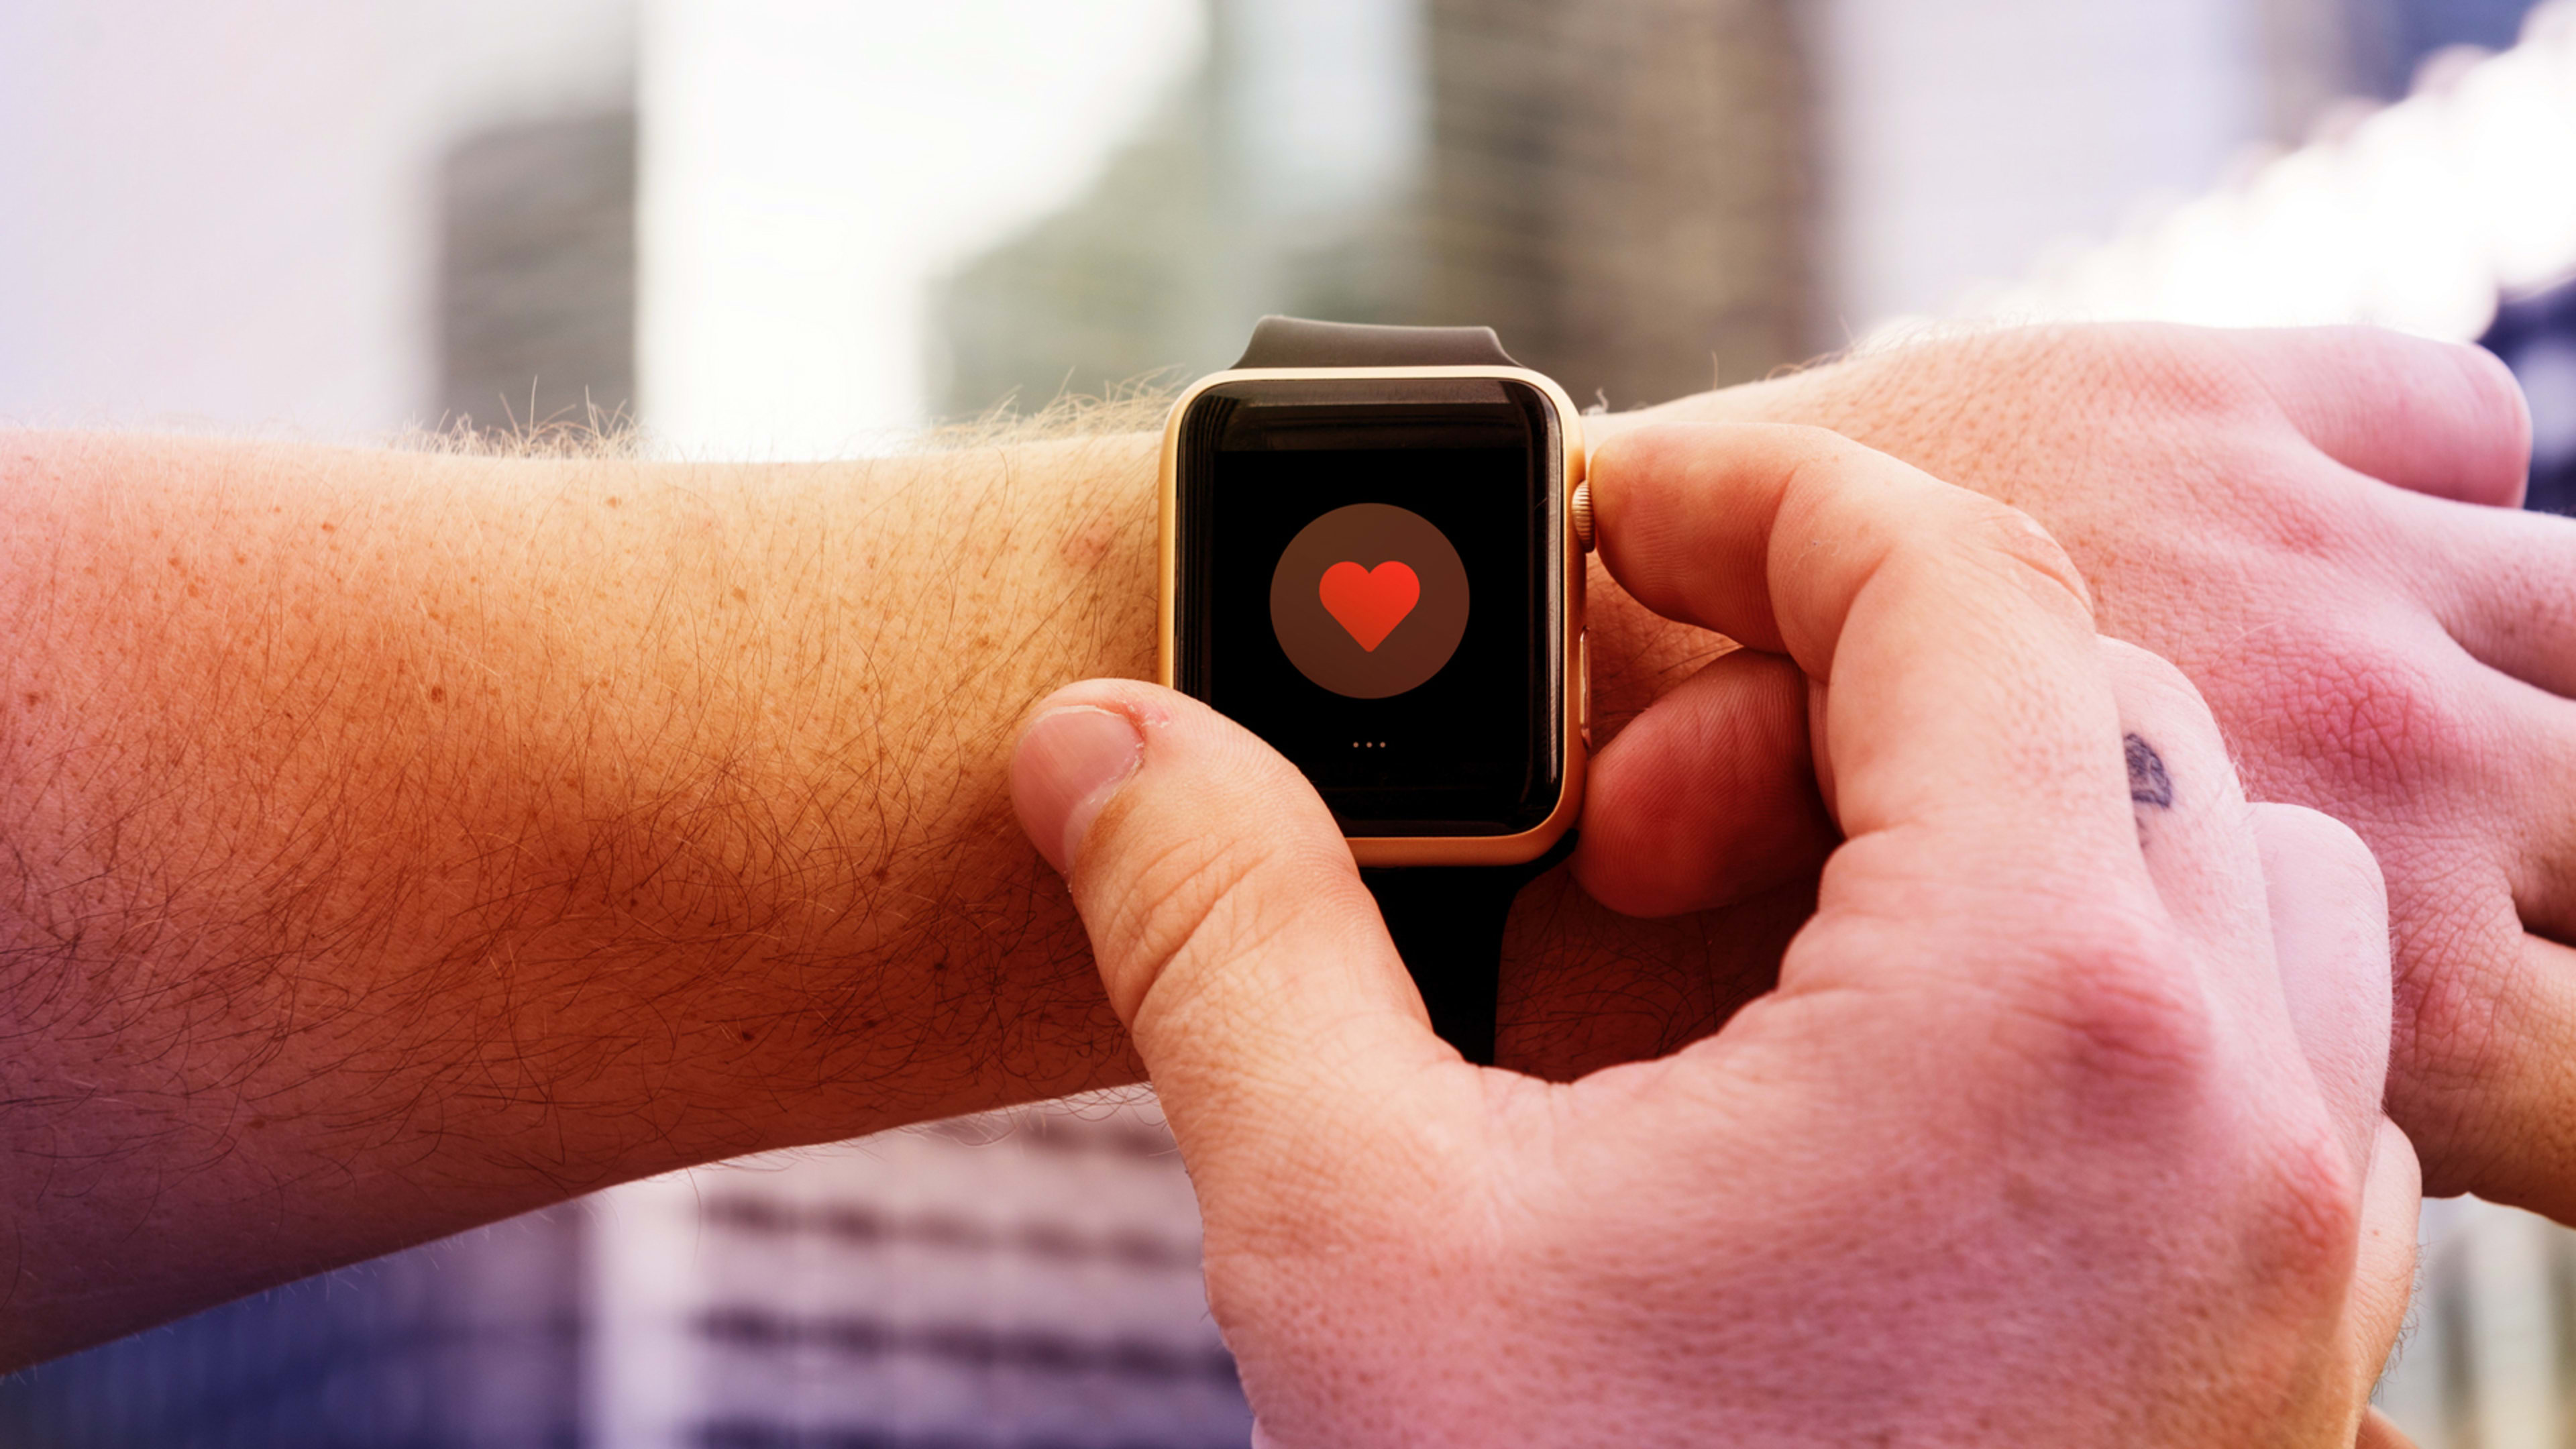 Apple is donating 1,000 watches for a binge eating study